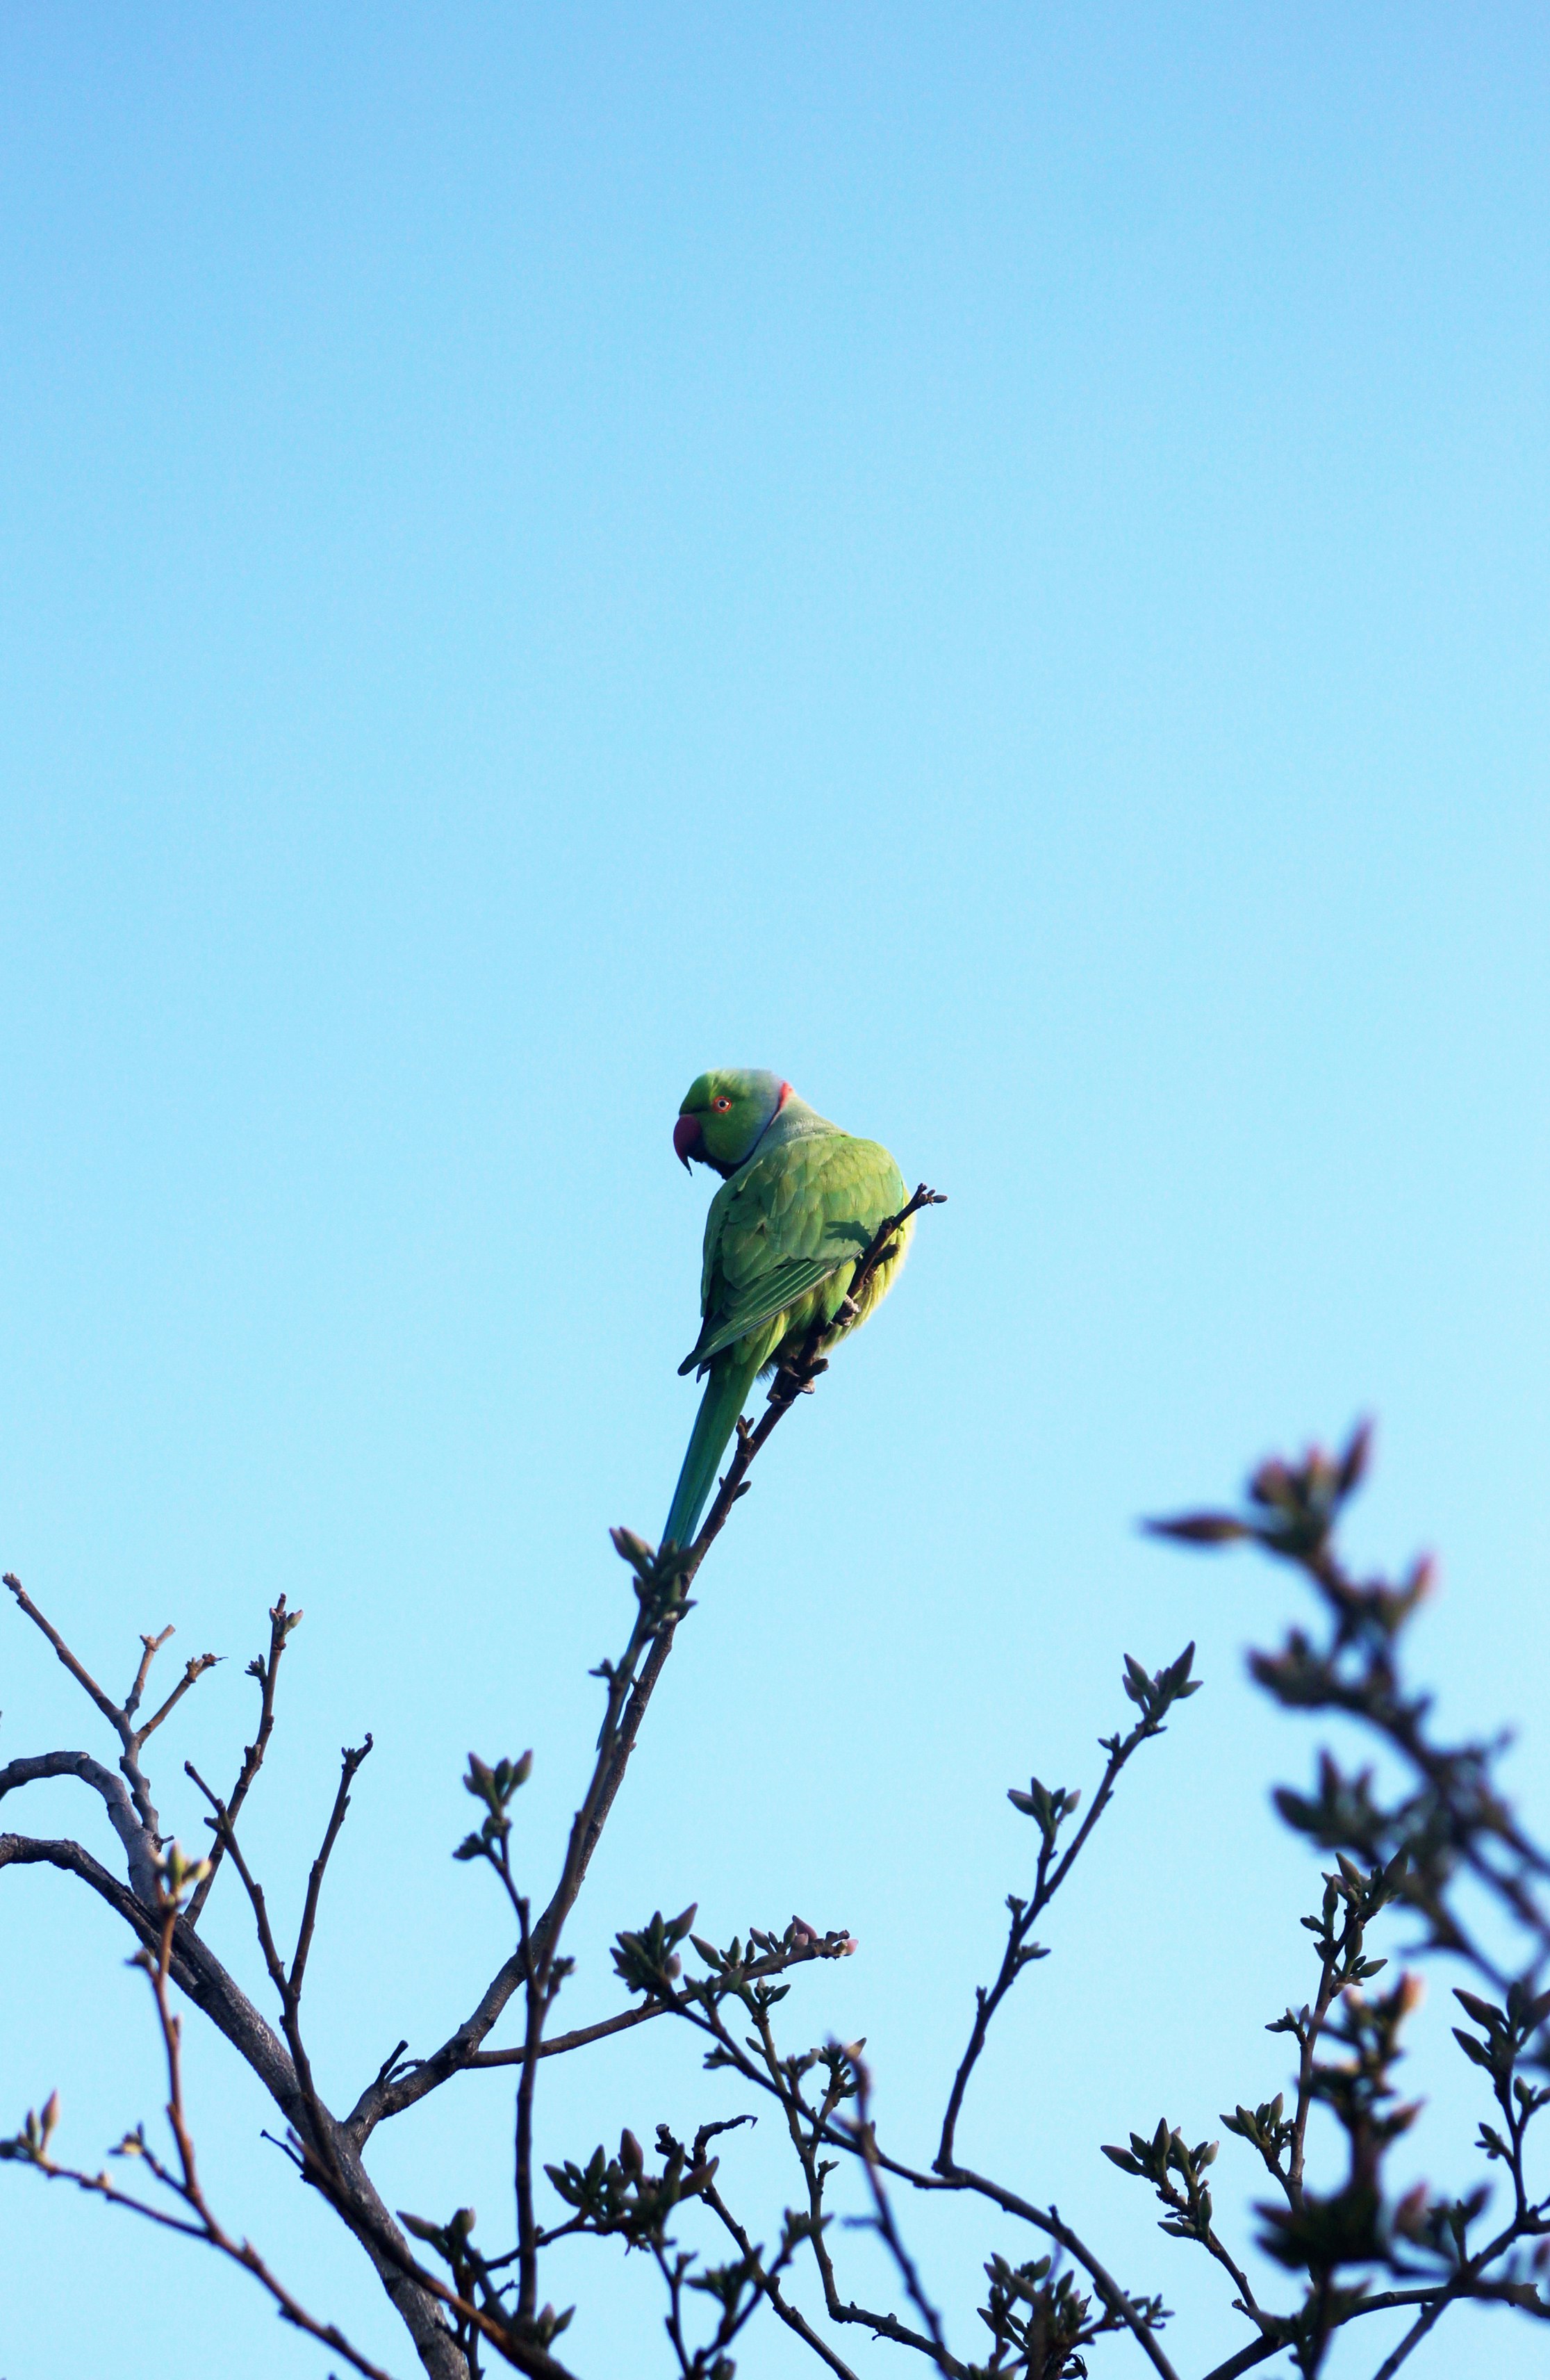 green bird perched on brown tree branch during daytime